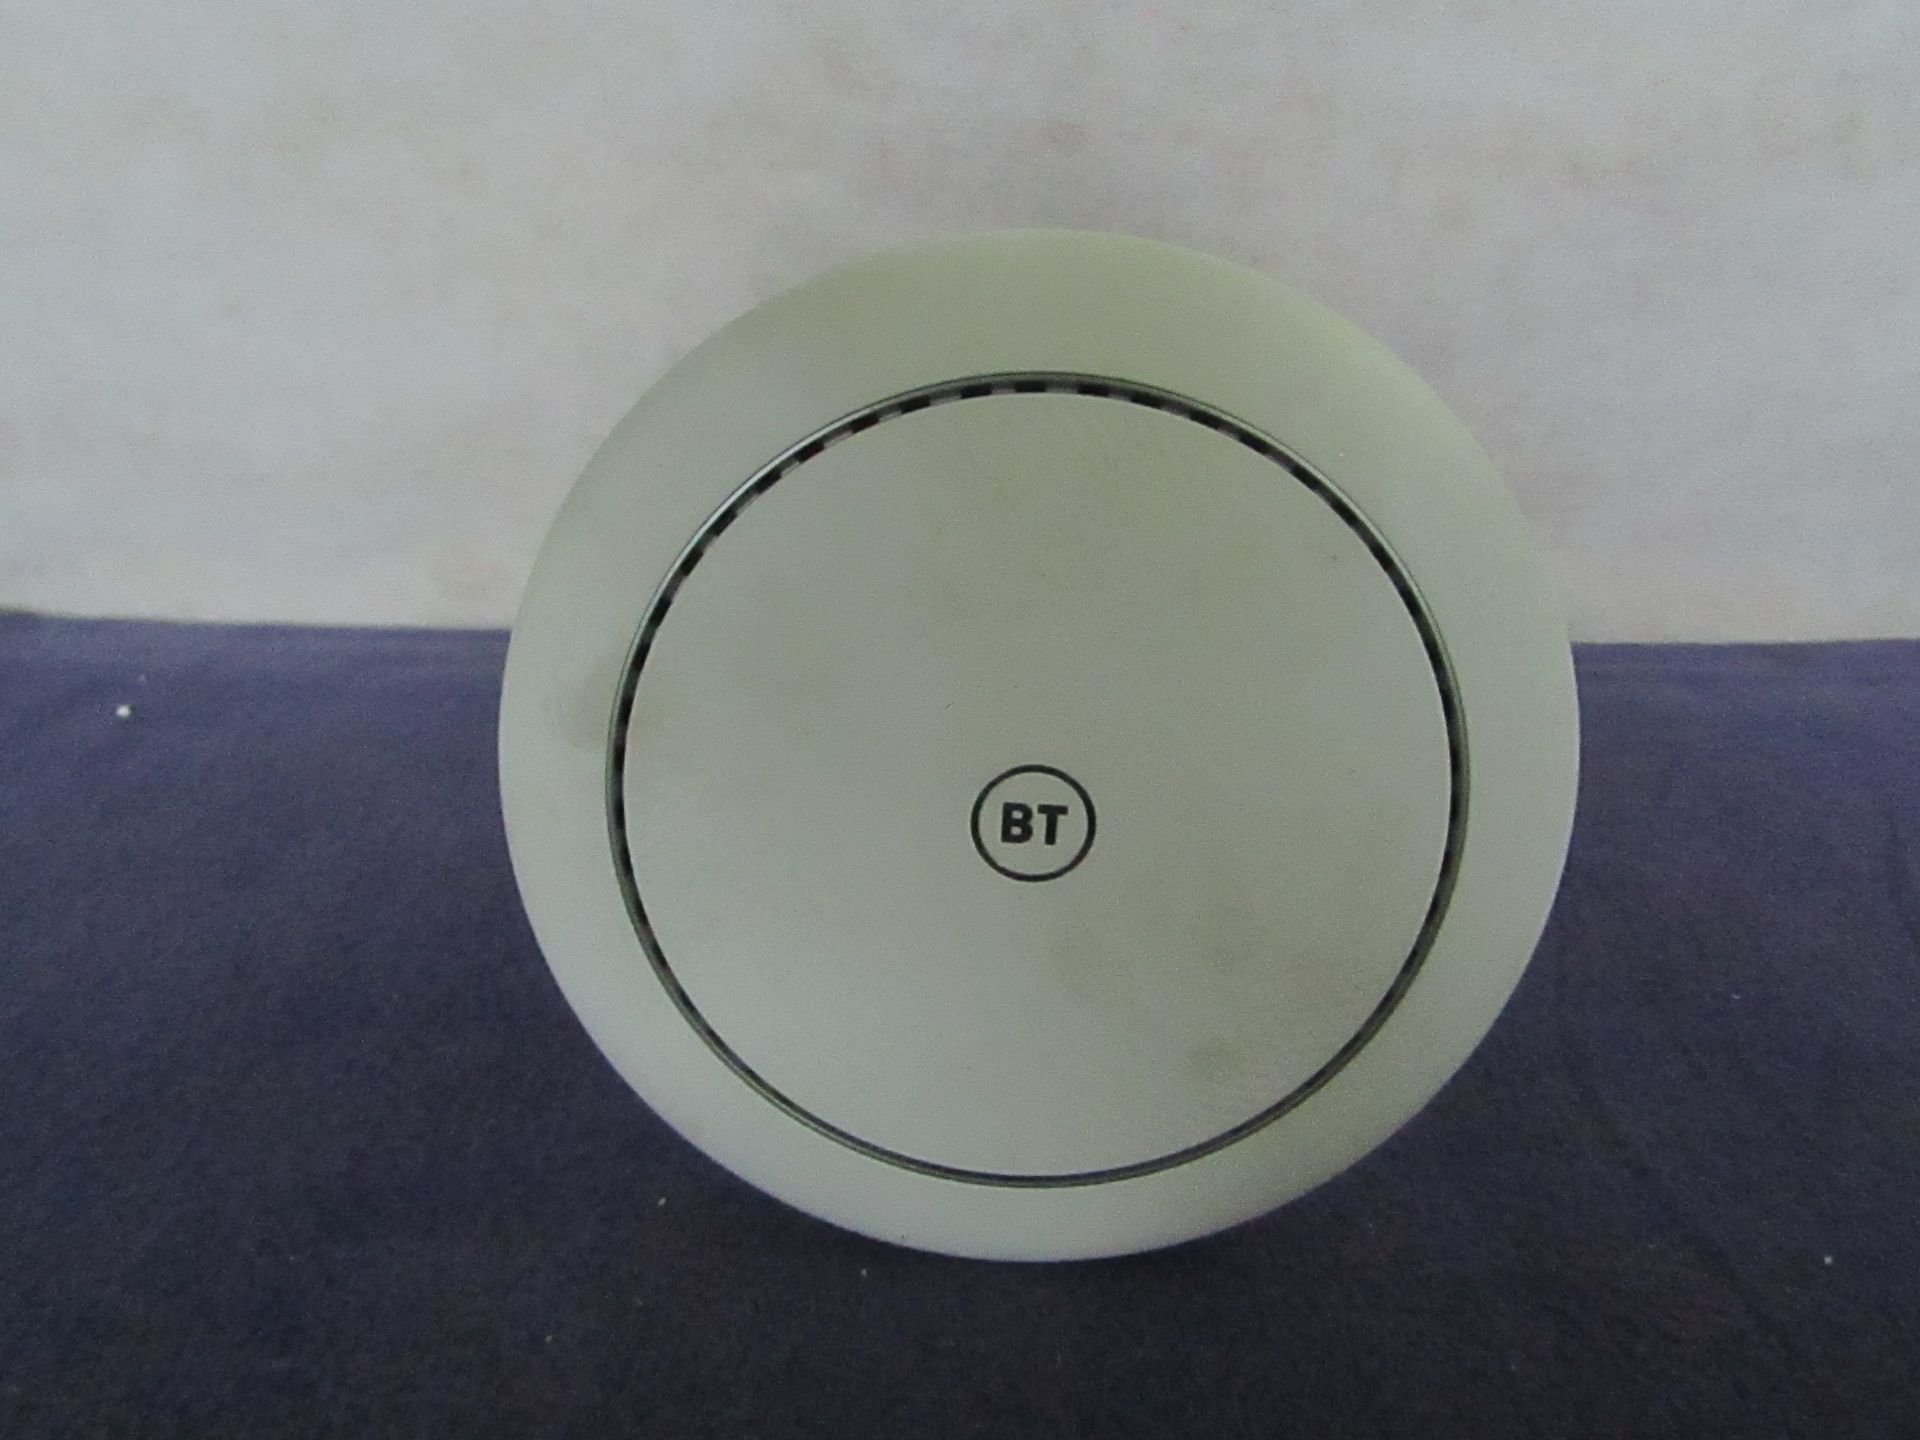 BT - Add-on disc for Whole Home Wi-Fi Premium - White - Untested, No Packaging.